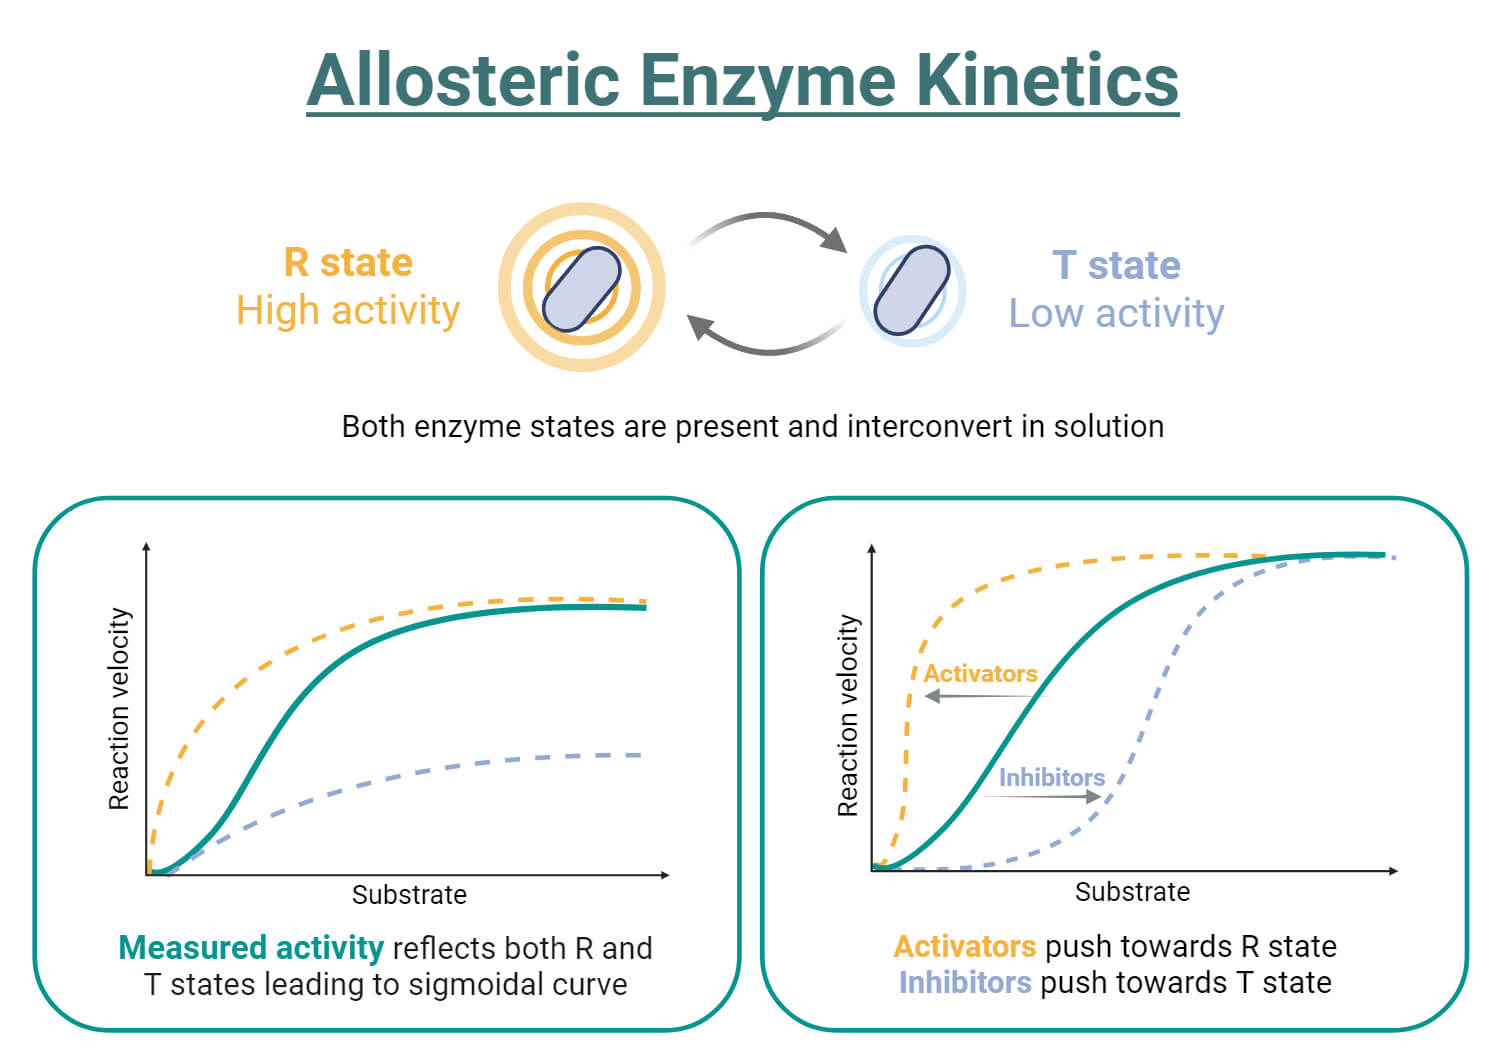 Allosteric enzyme kinetics